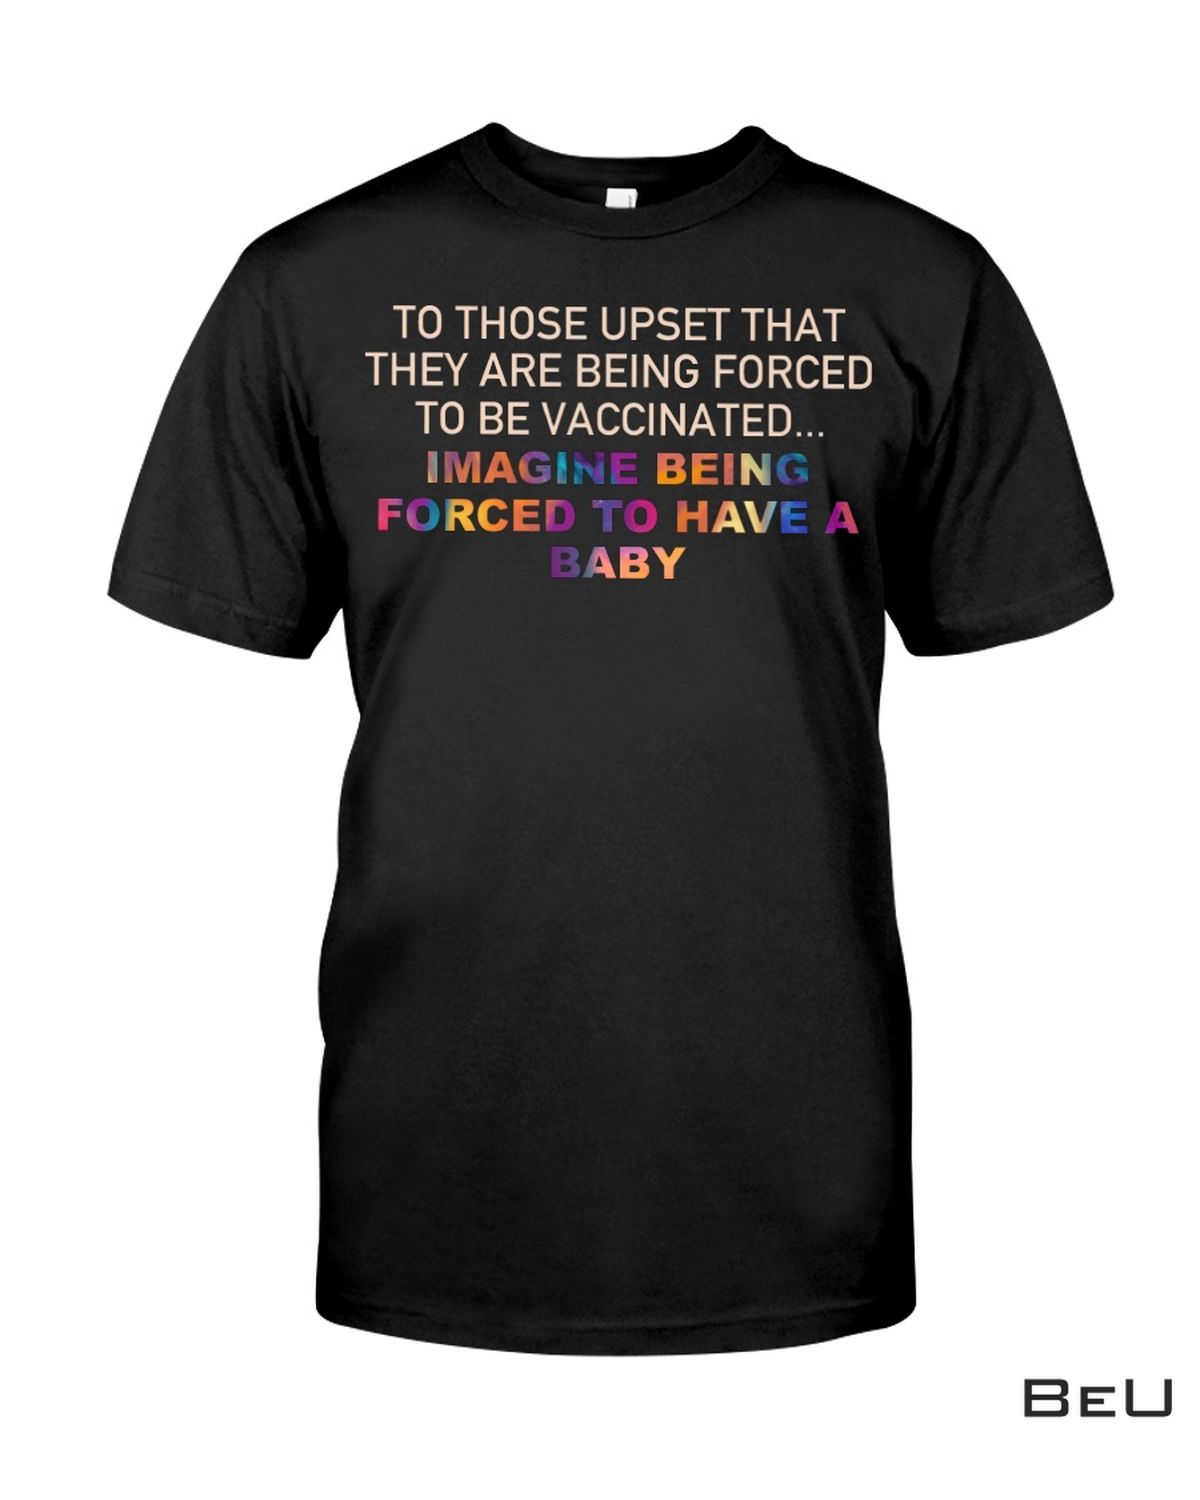 To Those Who Upset That They Are Being Forced To Be Vaccinated Shirt